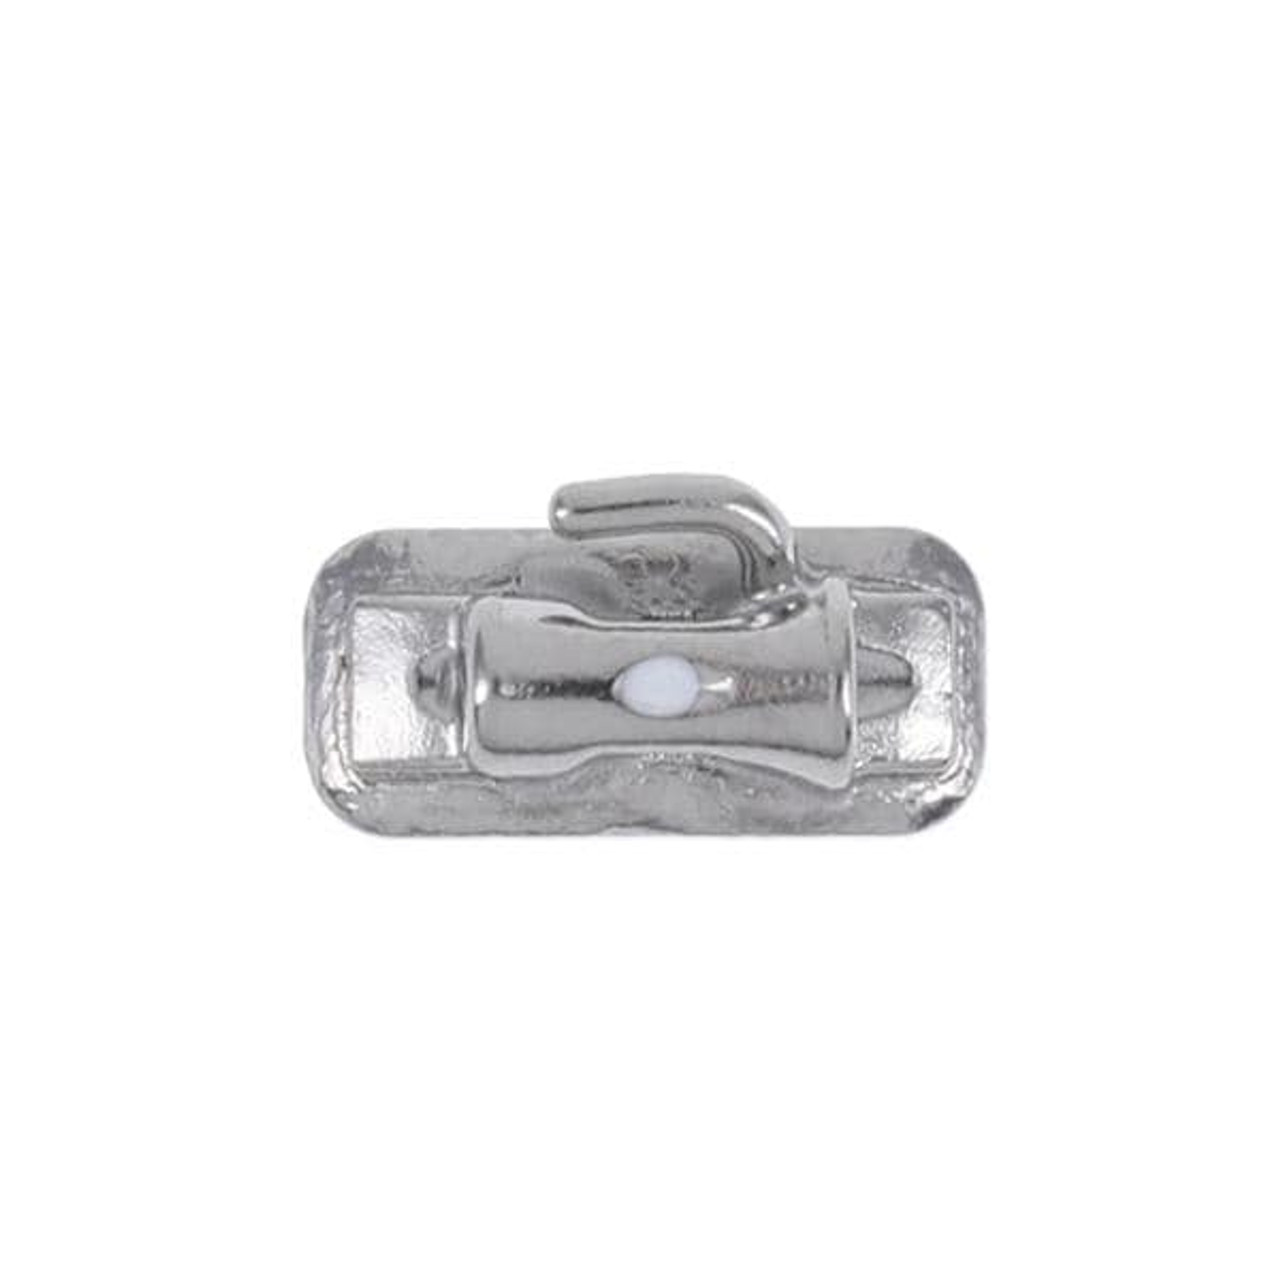 MOLAR BAND TRAY LEFT LOWER WIT